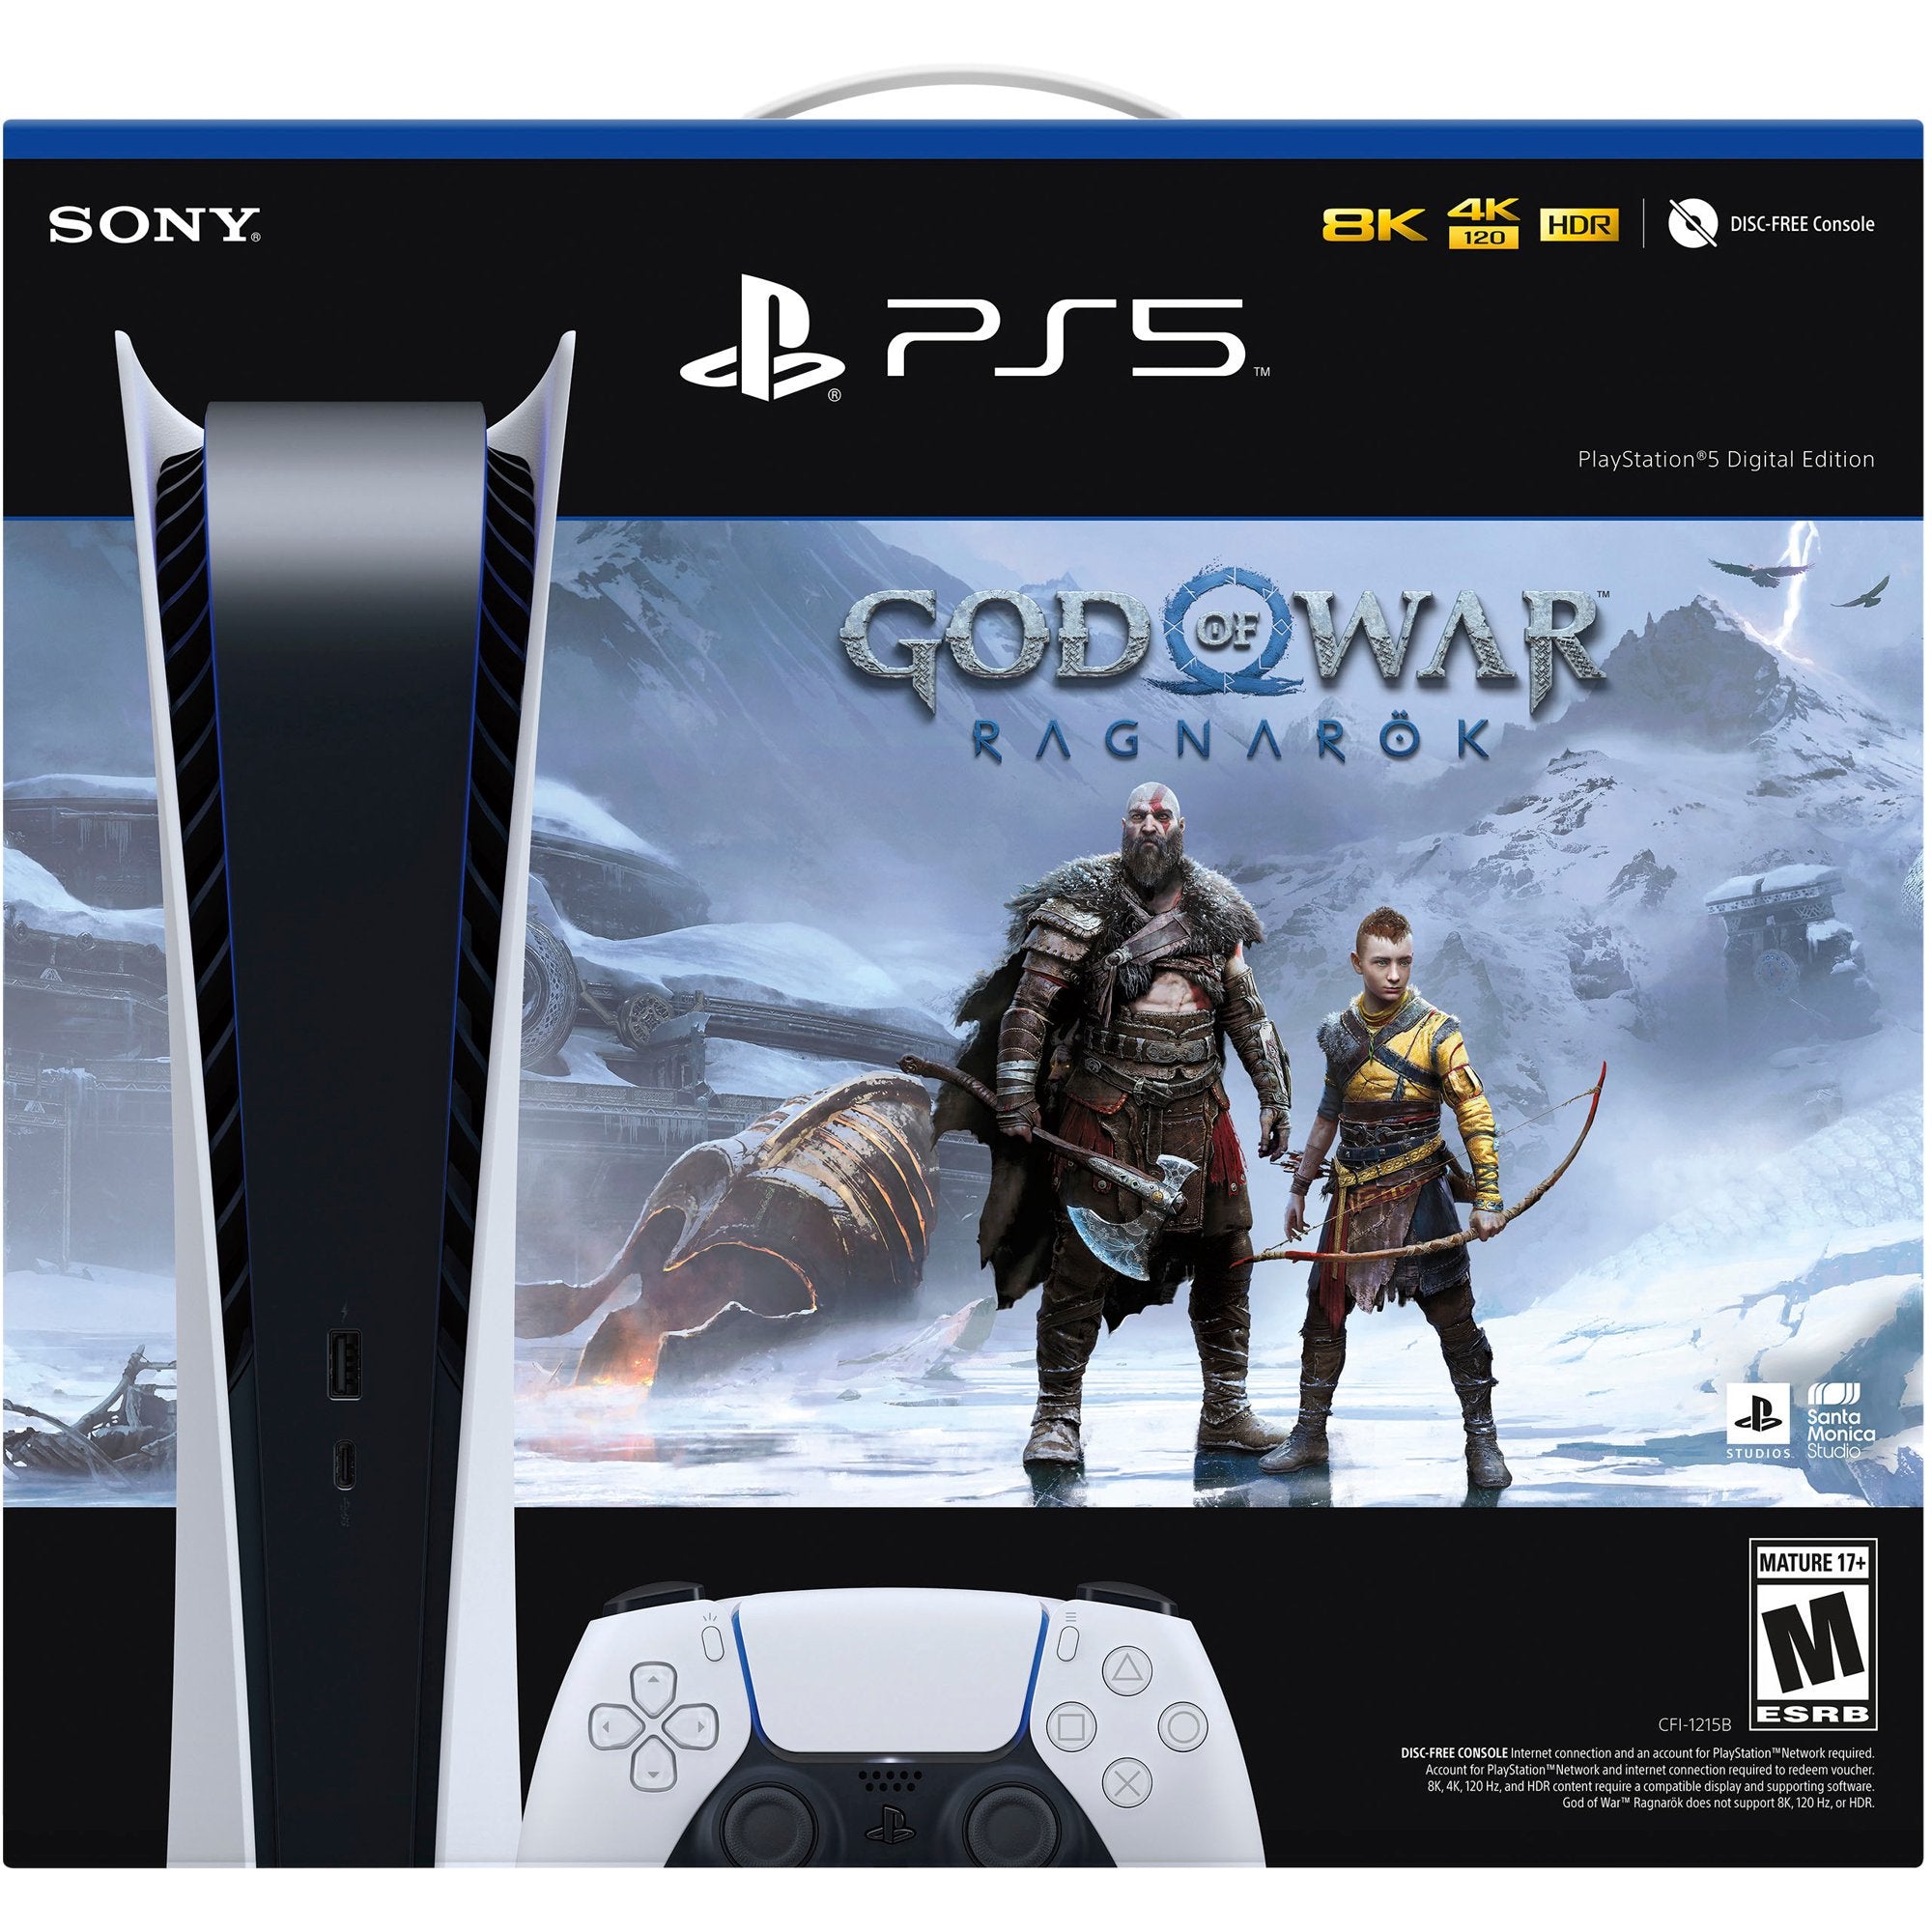 PlayStation_PS5 Video Game Console (Digital Edition) – God of War